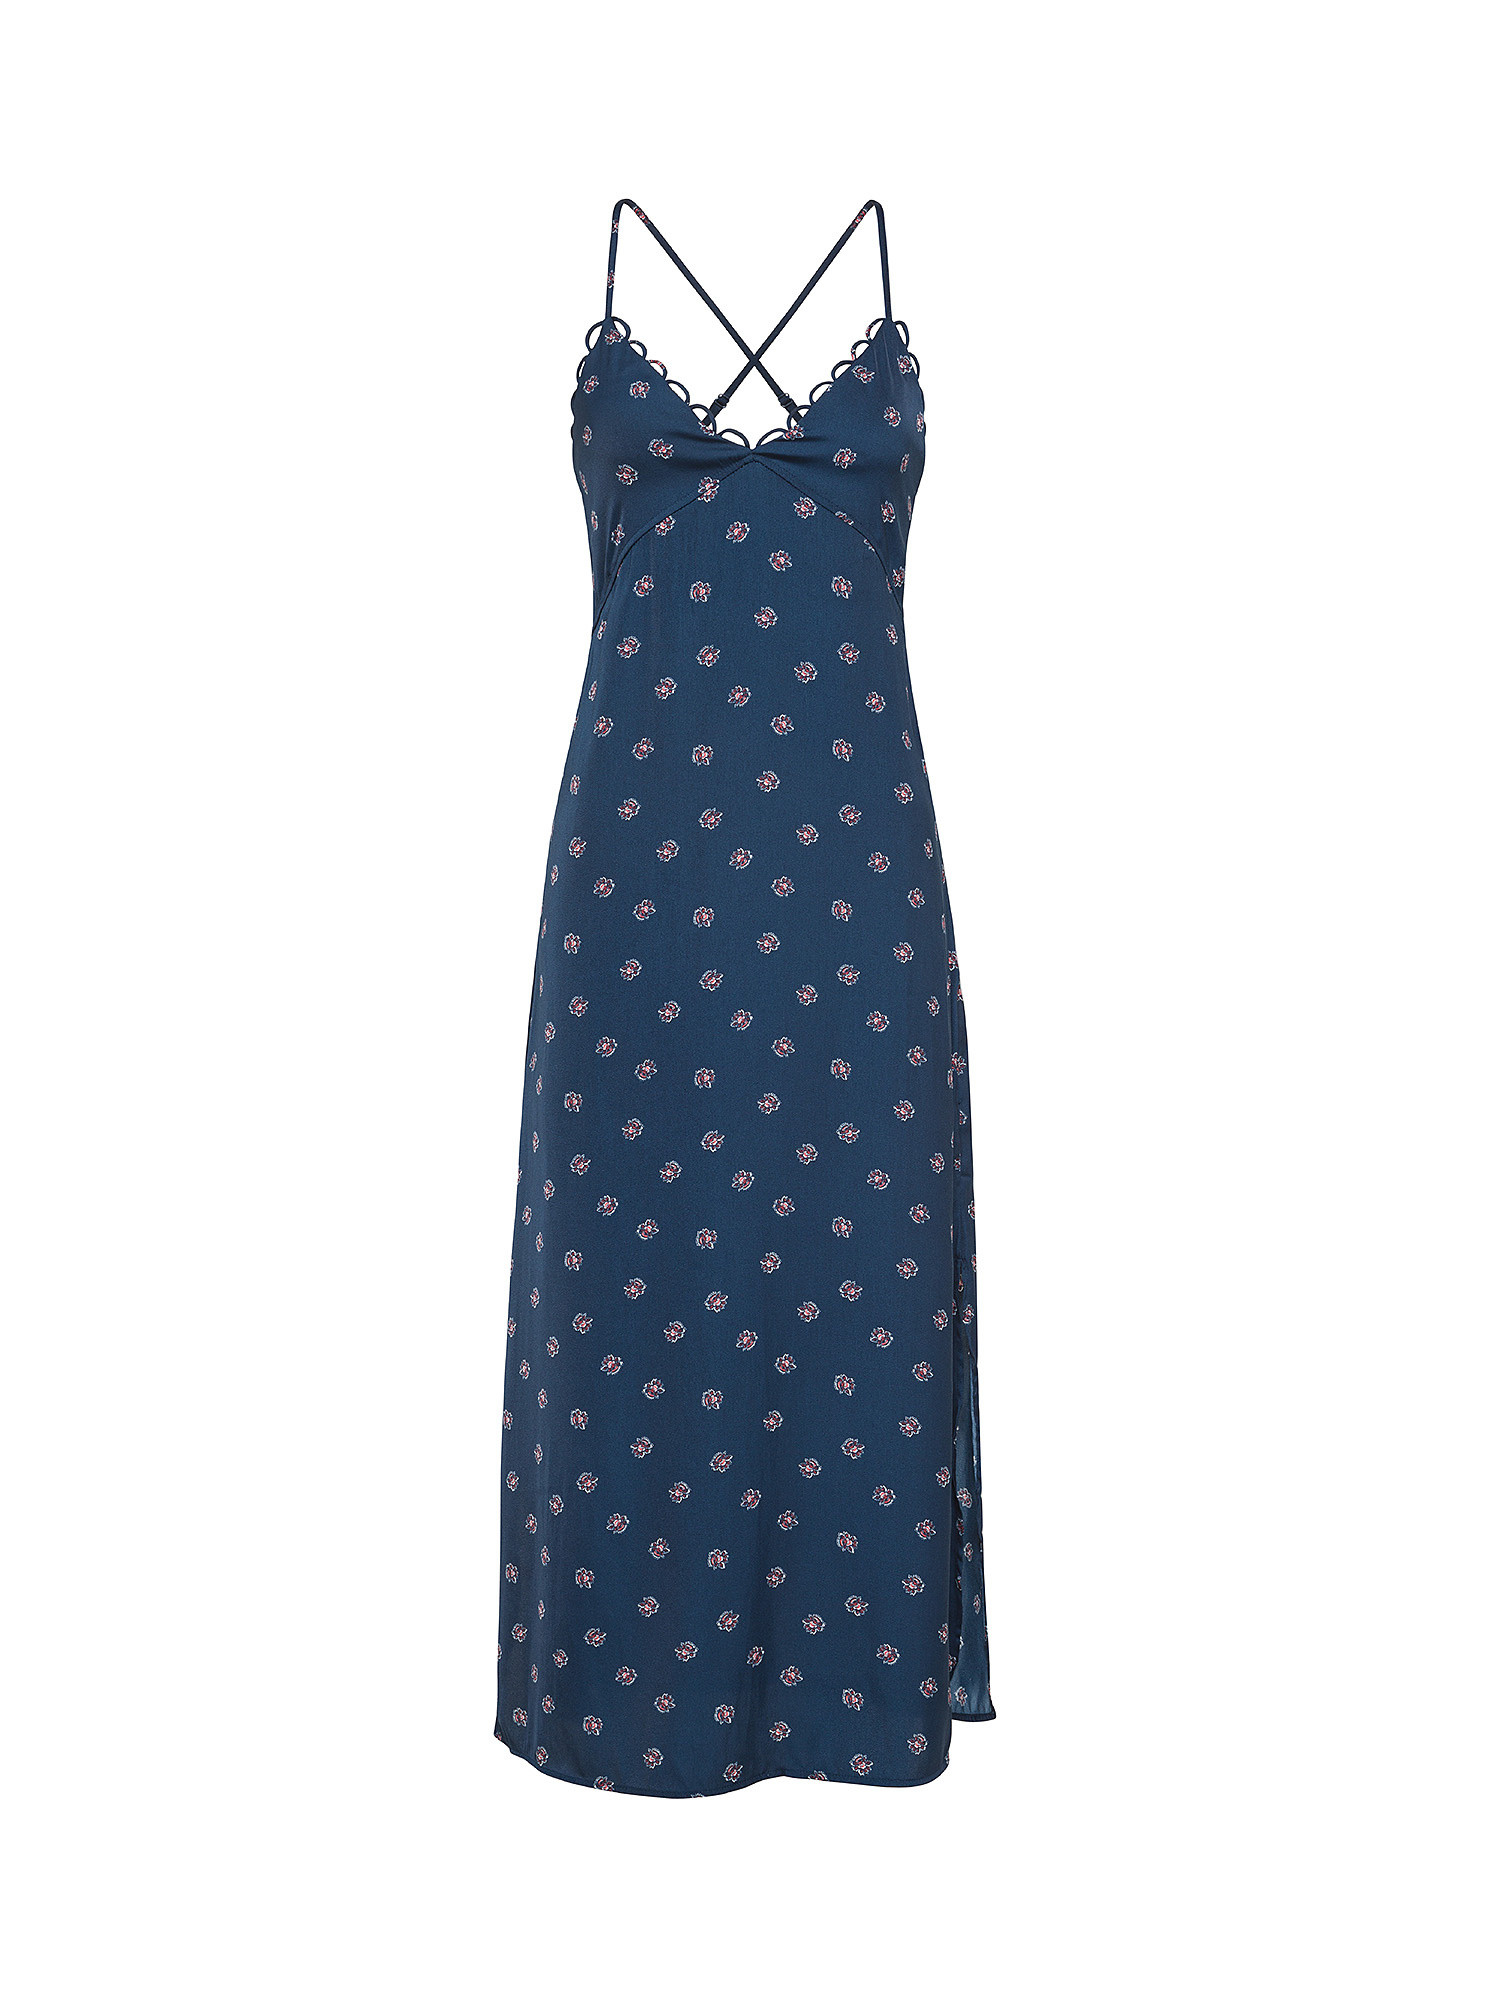 Pepe Jeans - Dress with floral print, Dark Blue, large image number 0